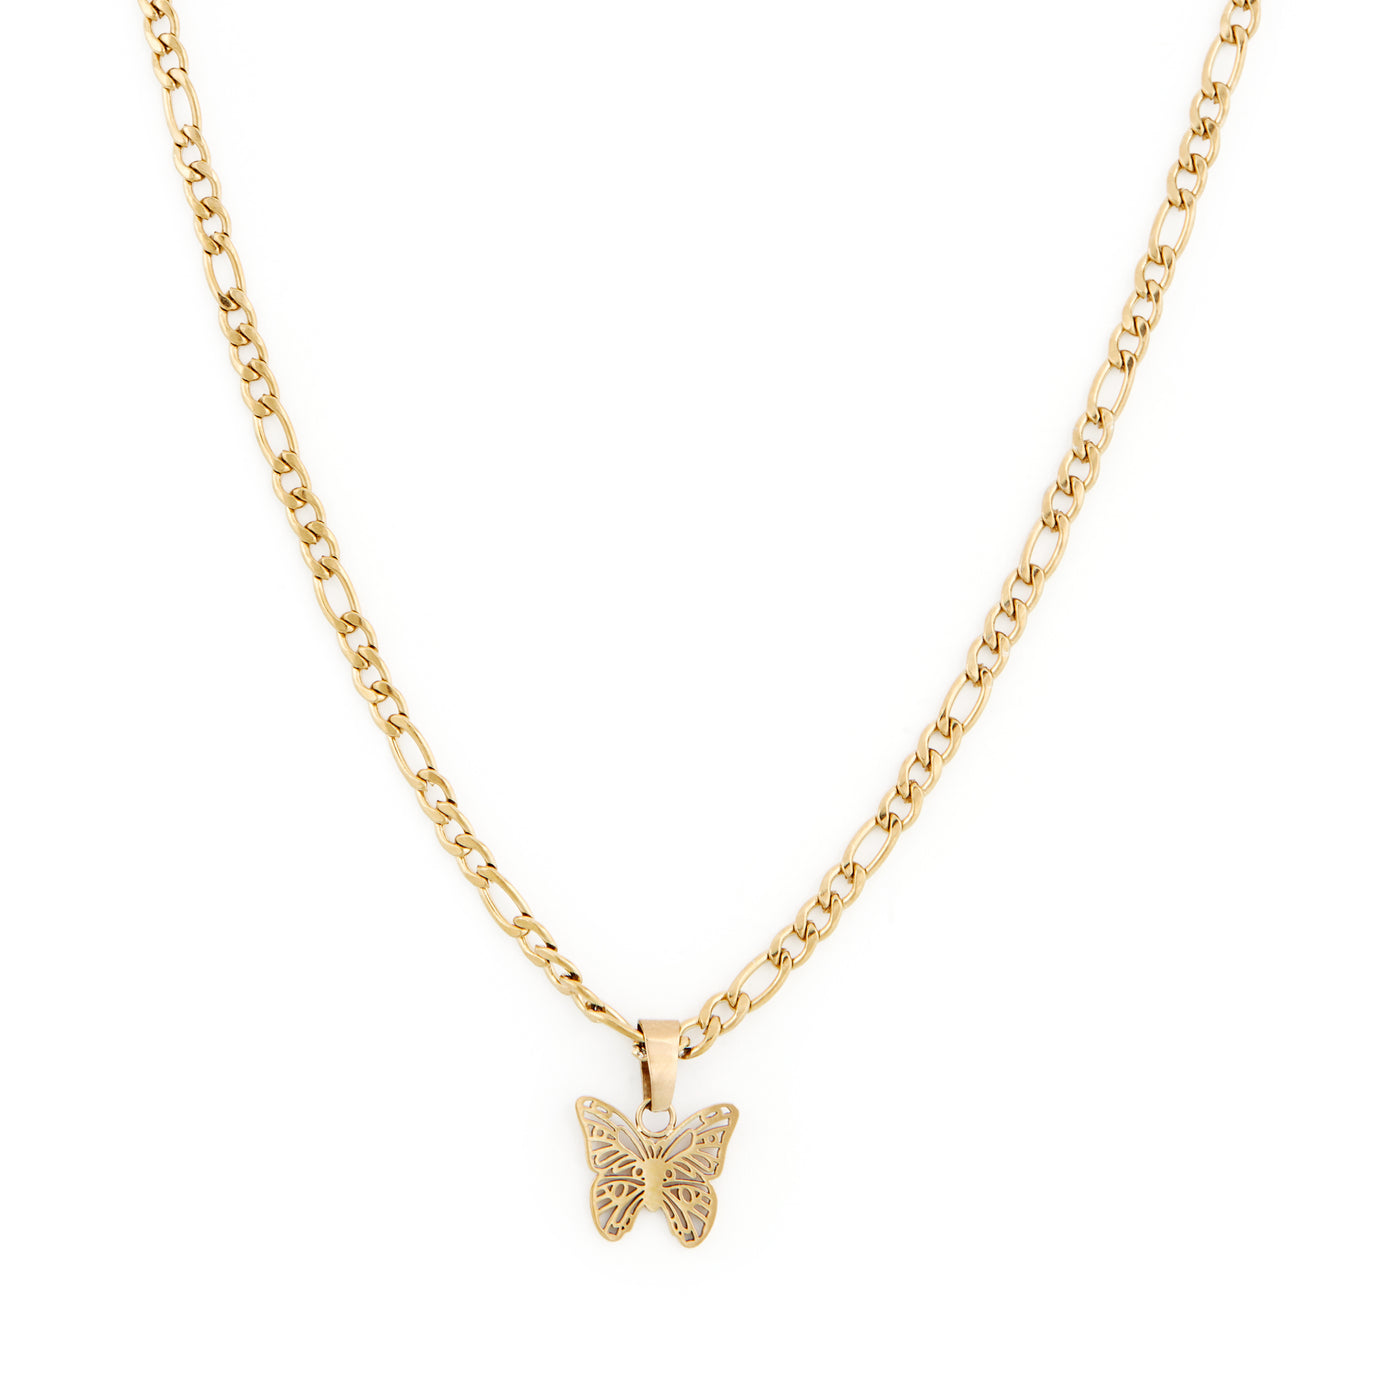 Muse Necklace - Gold